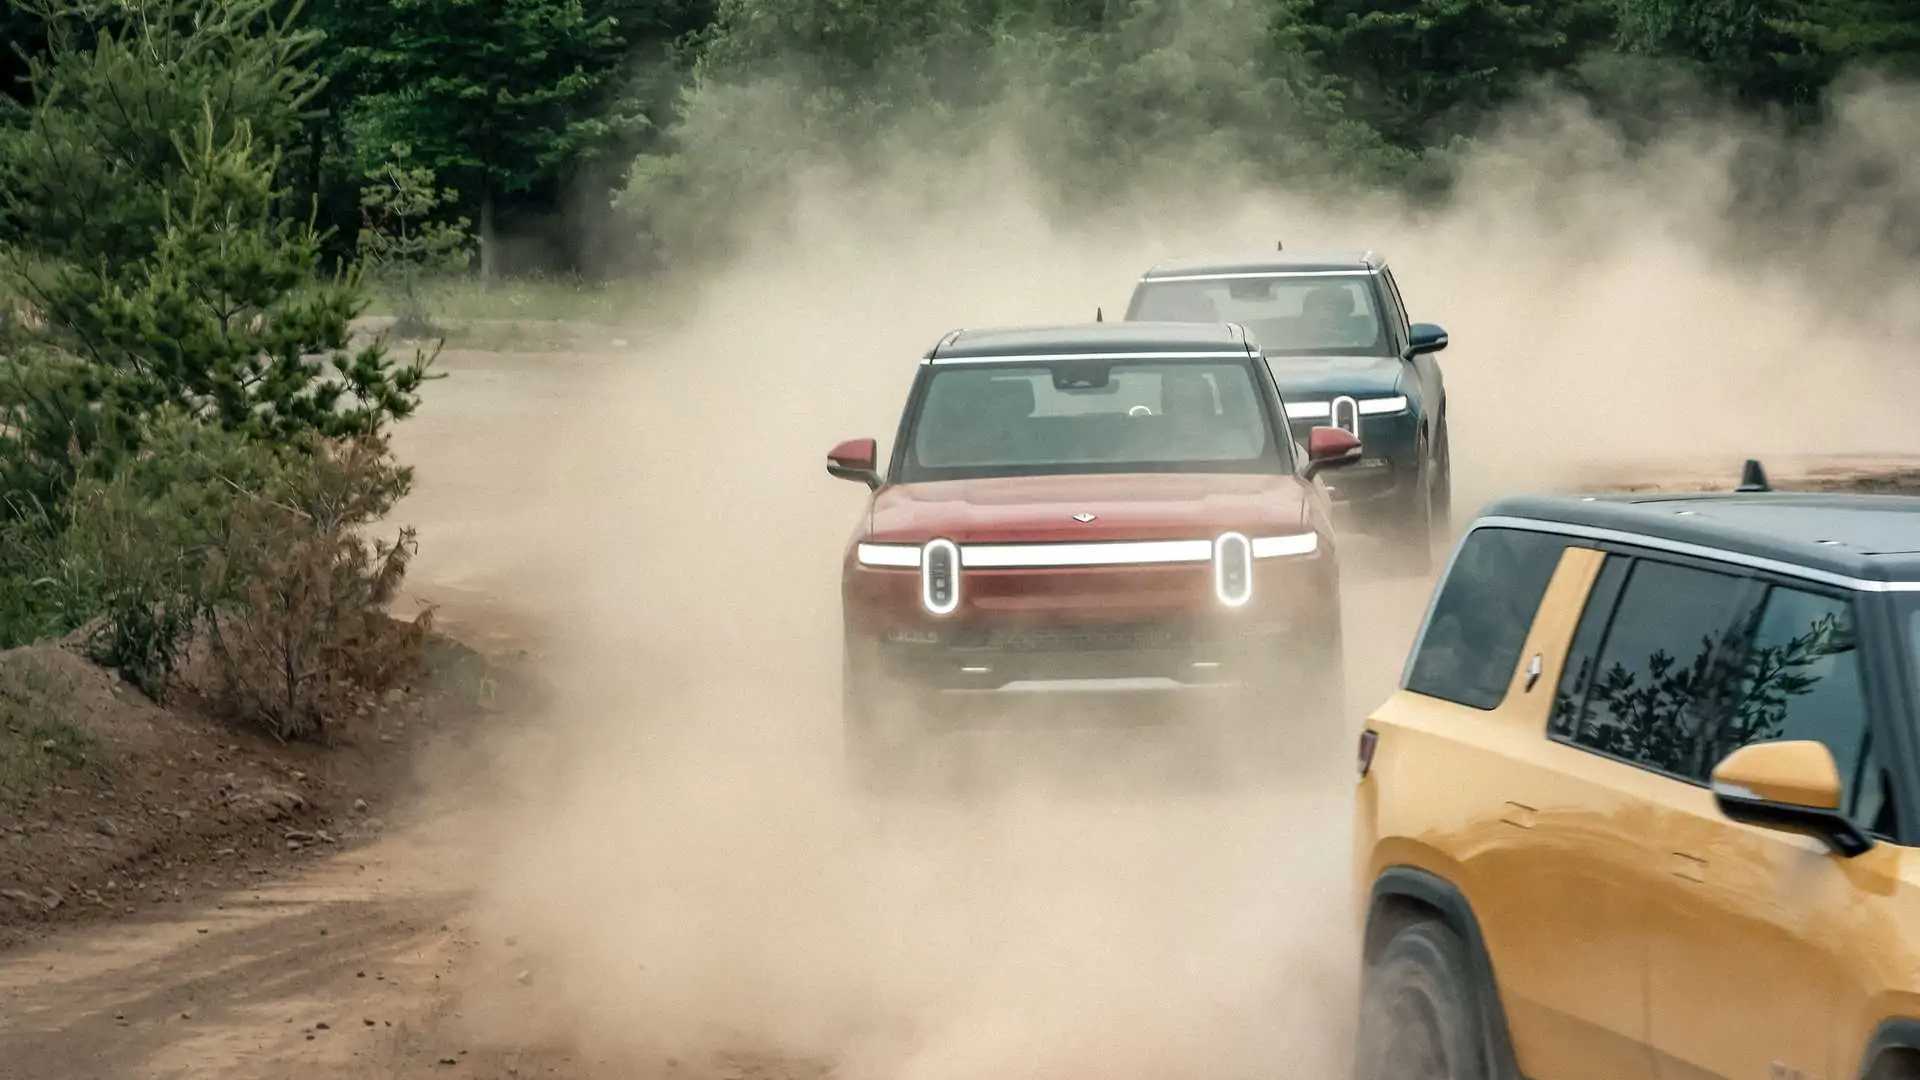 rivian to become profitable in 2024, launch cheaper r2 model a year later